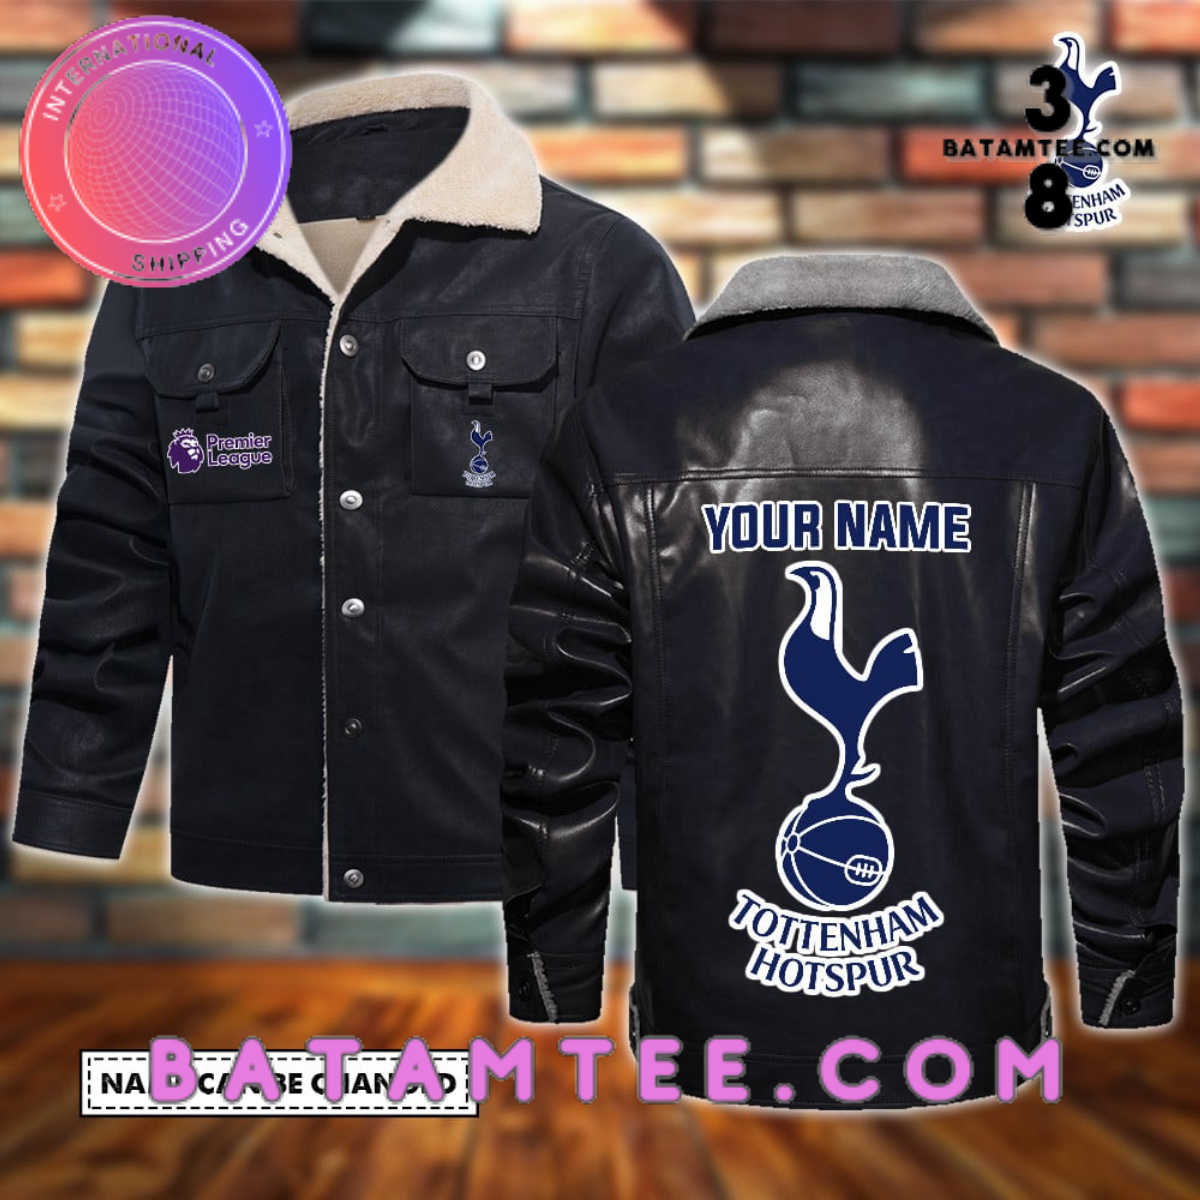 Personalized Leather jacket for Tottenham Hotspur FC fans-Limited Edition